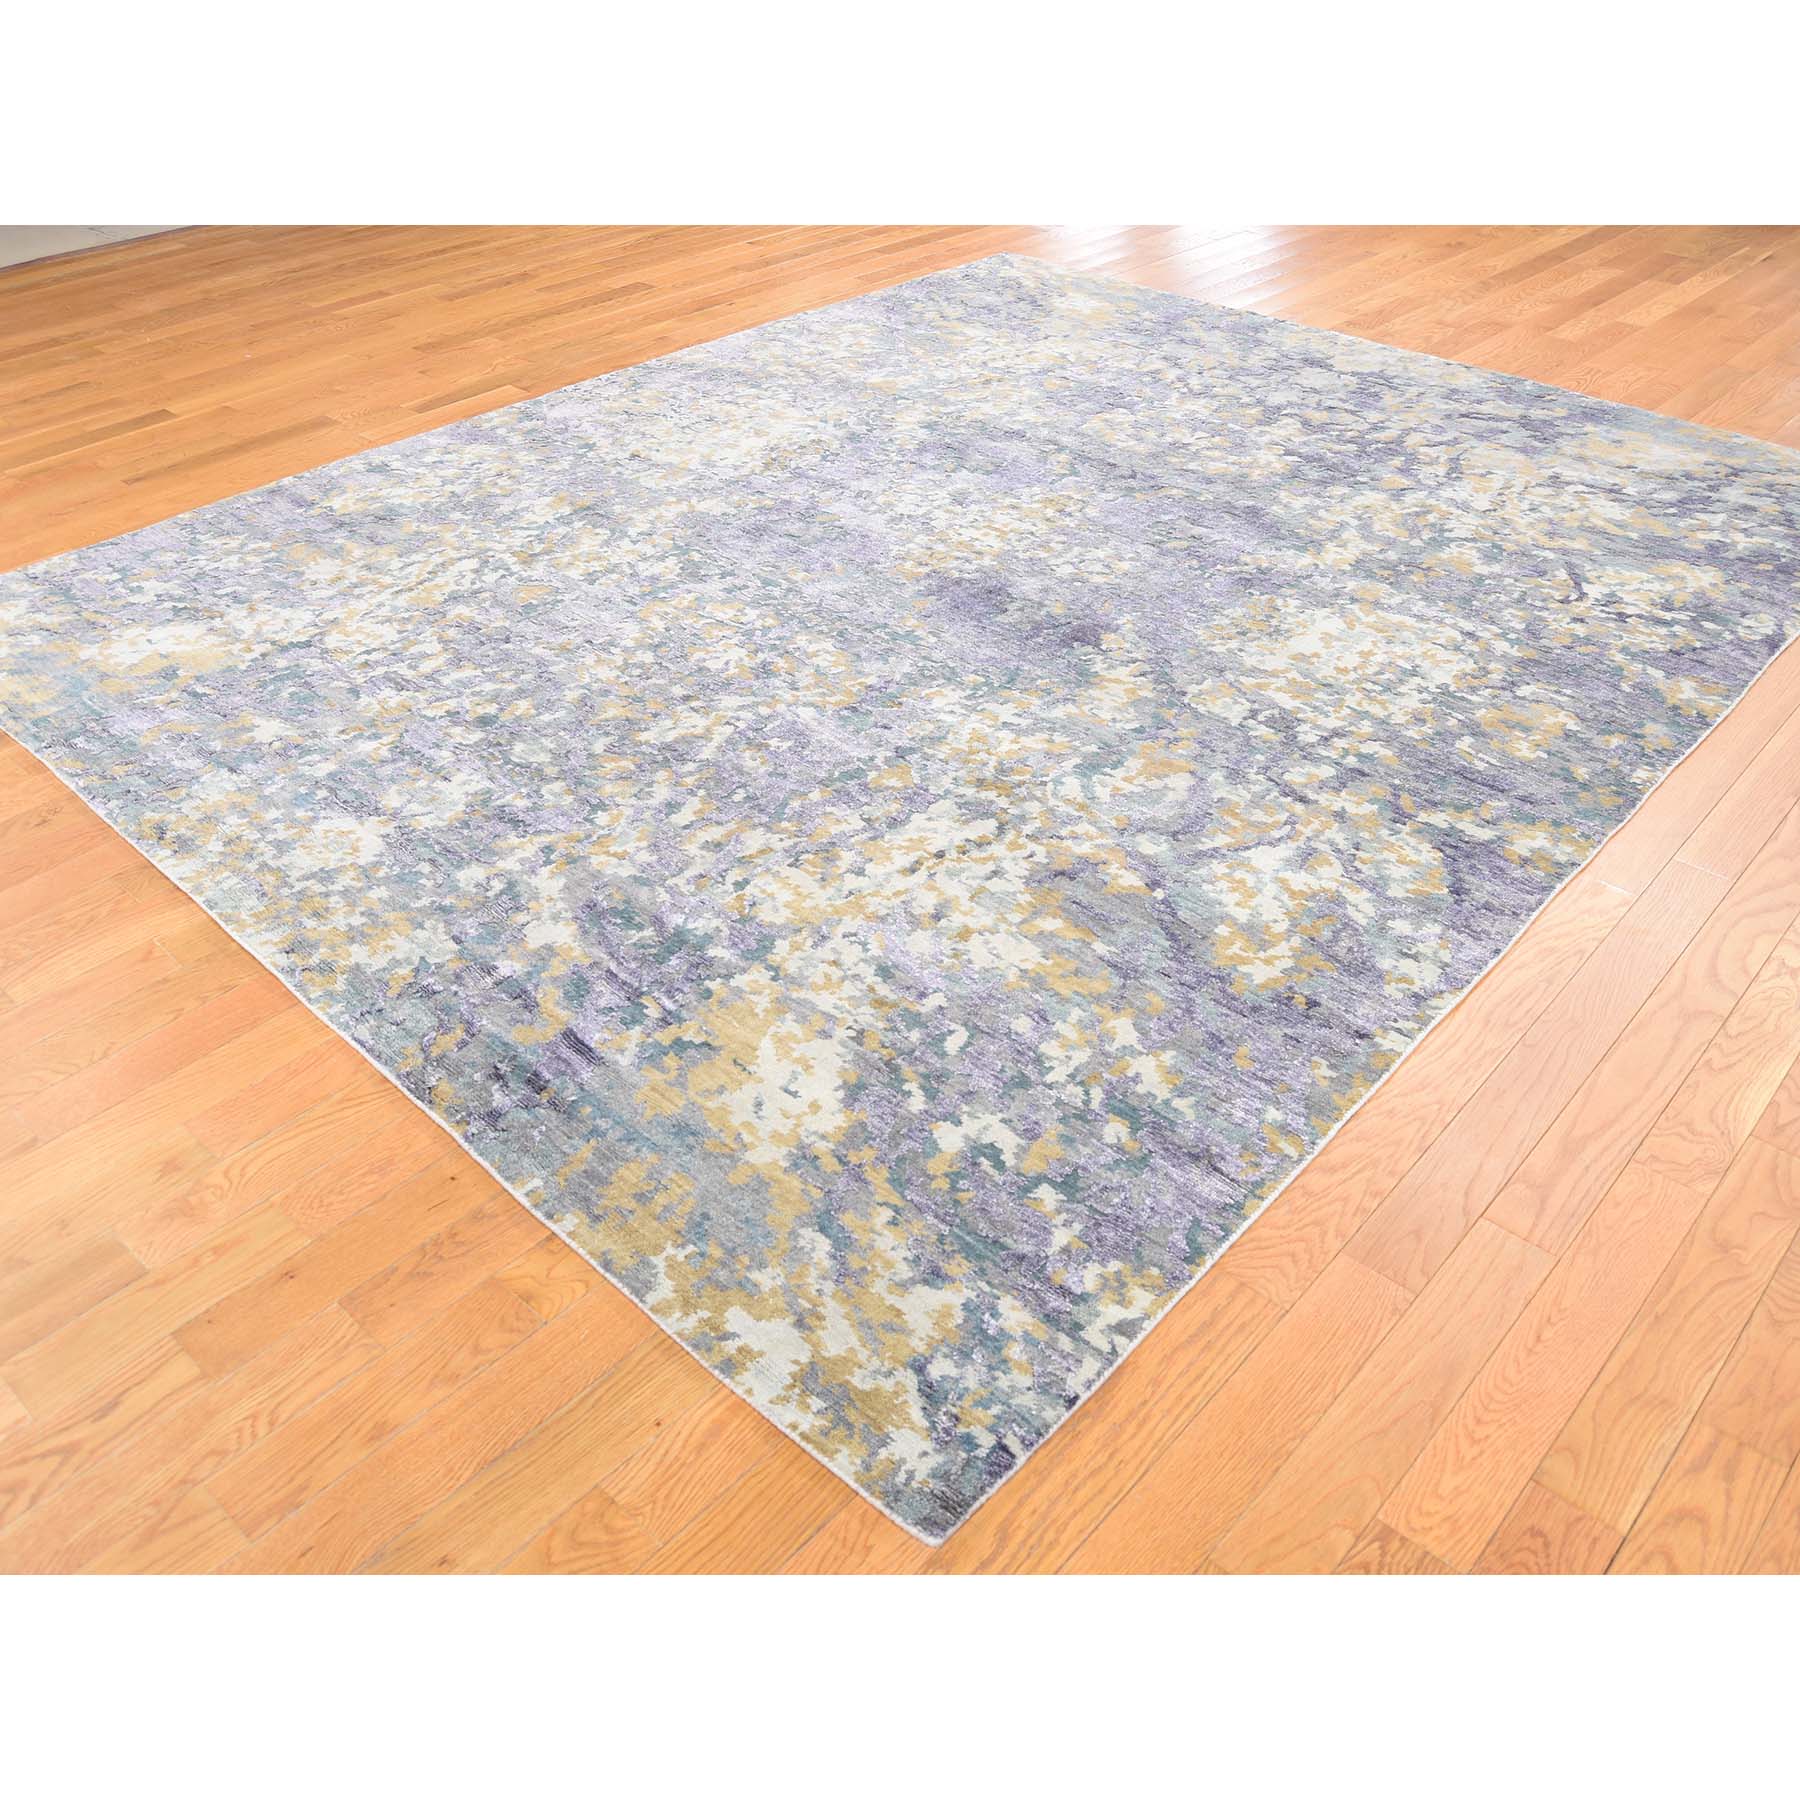 8-x9-10  Abstract Design Wool and Silk Hi-Lo Pile Hand-Knotted Rug 